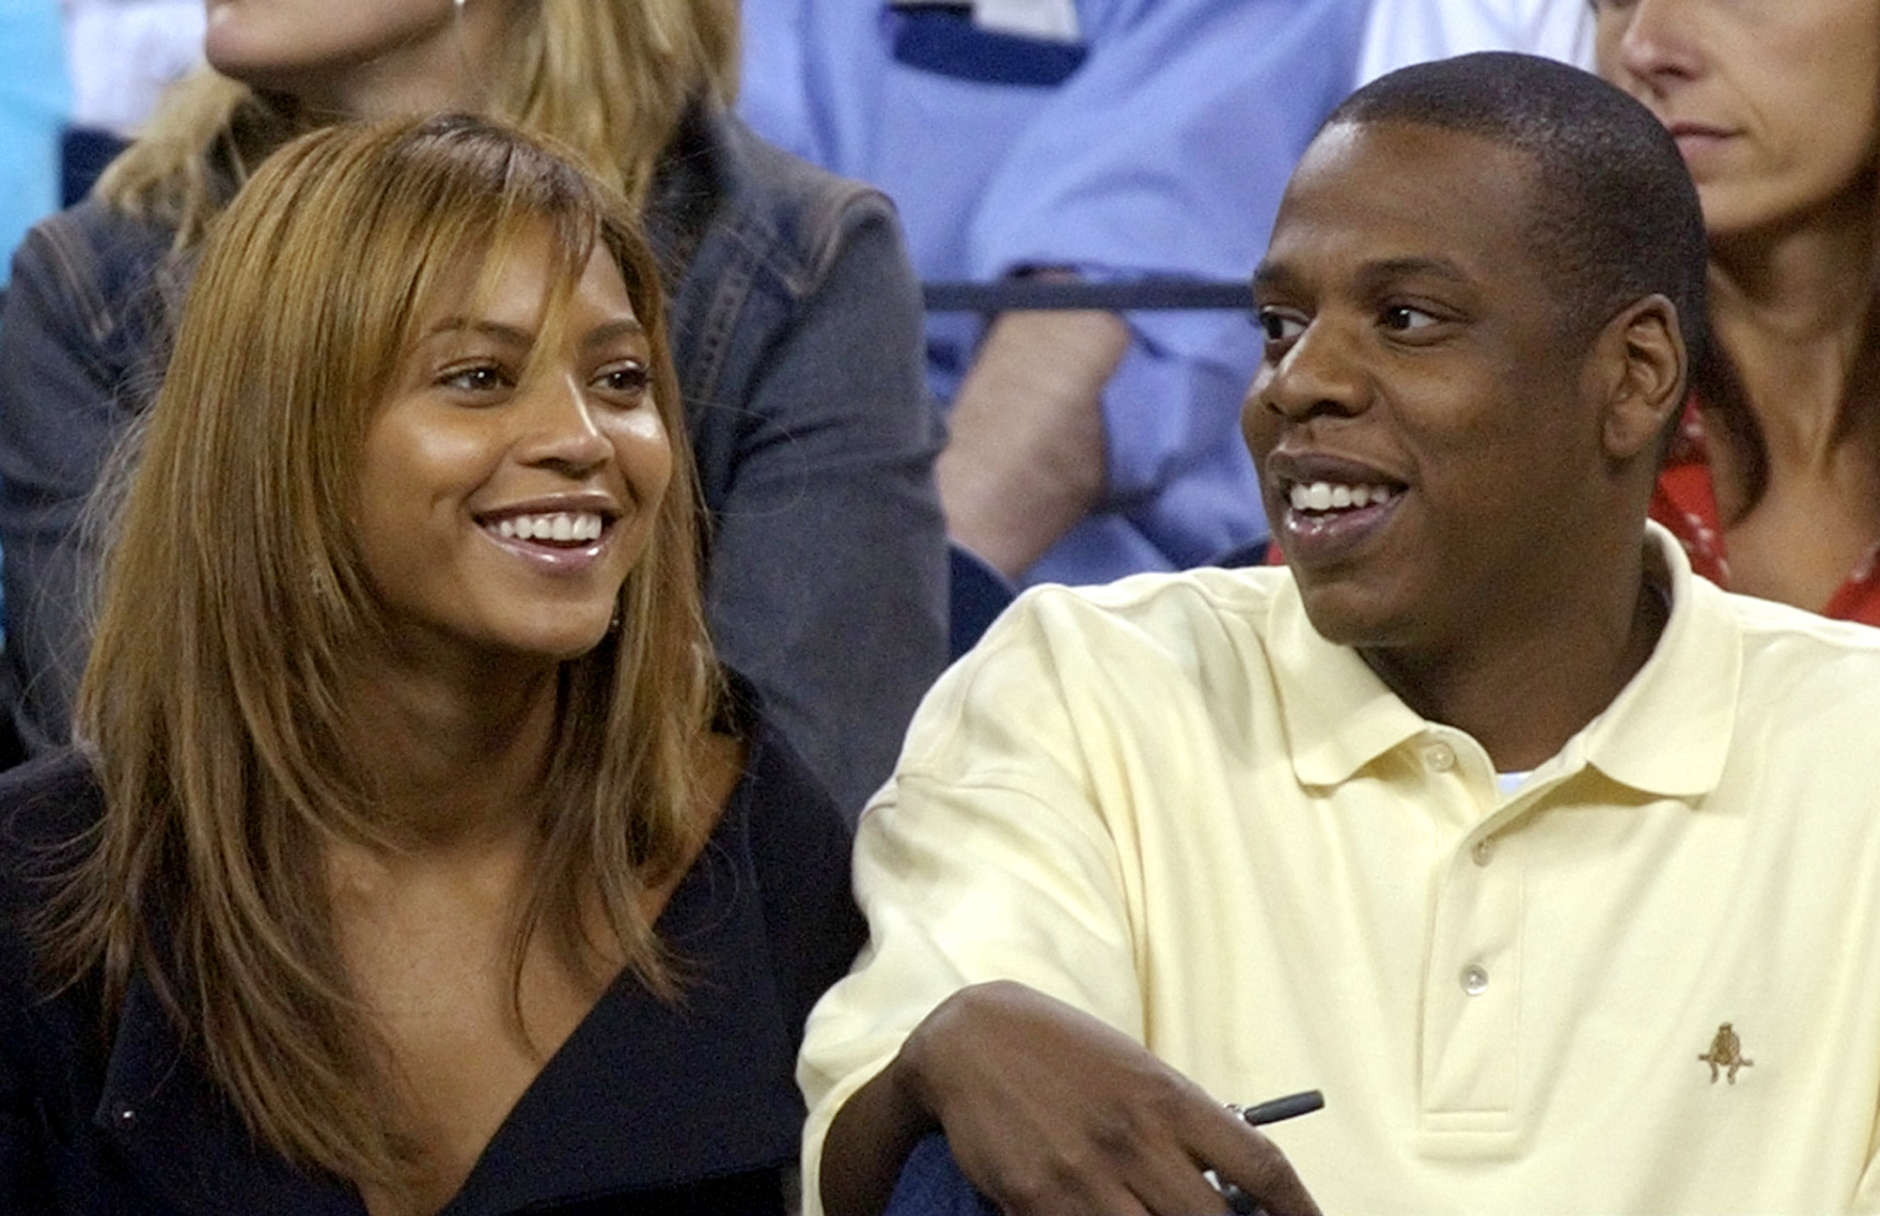 Singer Beyonce Knowles, left, and rapper Jay-Z, watch the match between Lindsay Davenport, of the United States, and Kim Clijsters, of Belgium, at the U.S. Open tennis tournament in New York, Friday, Sept. 5, 2003.  (AP Photo/Elise Amendola)